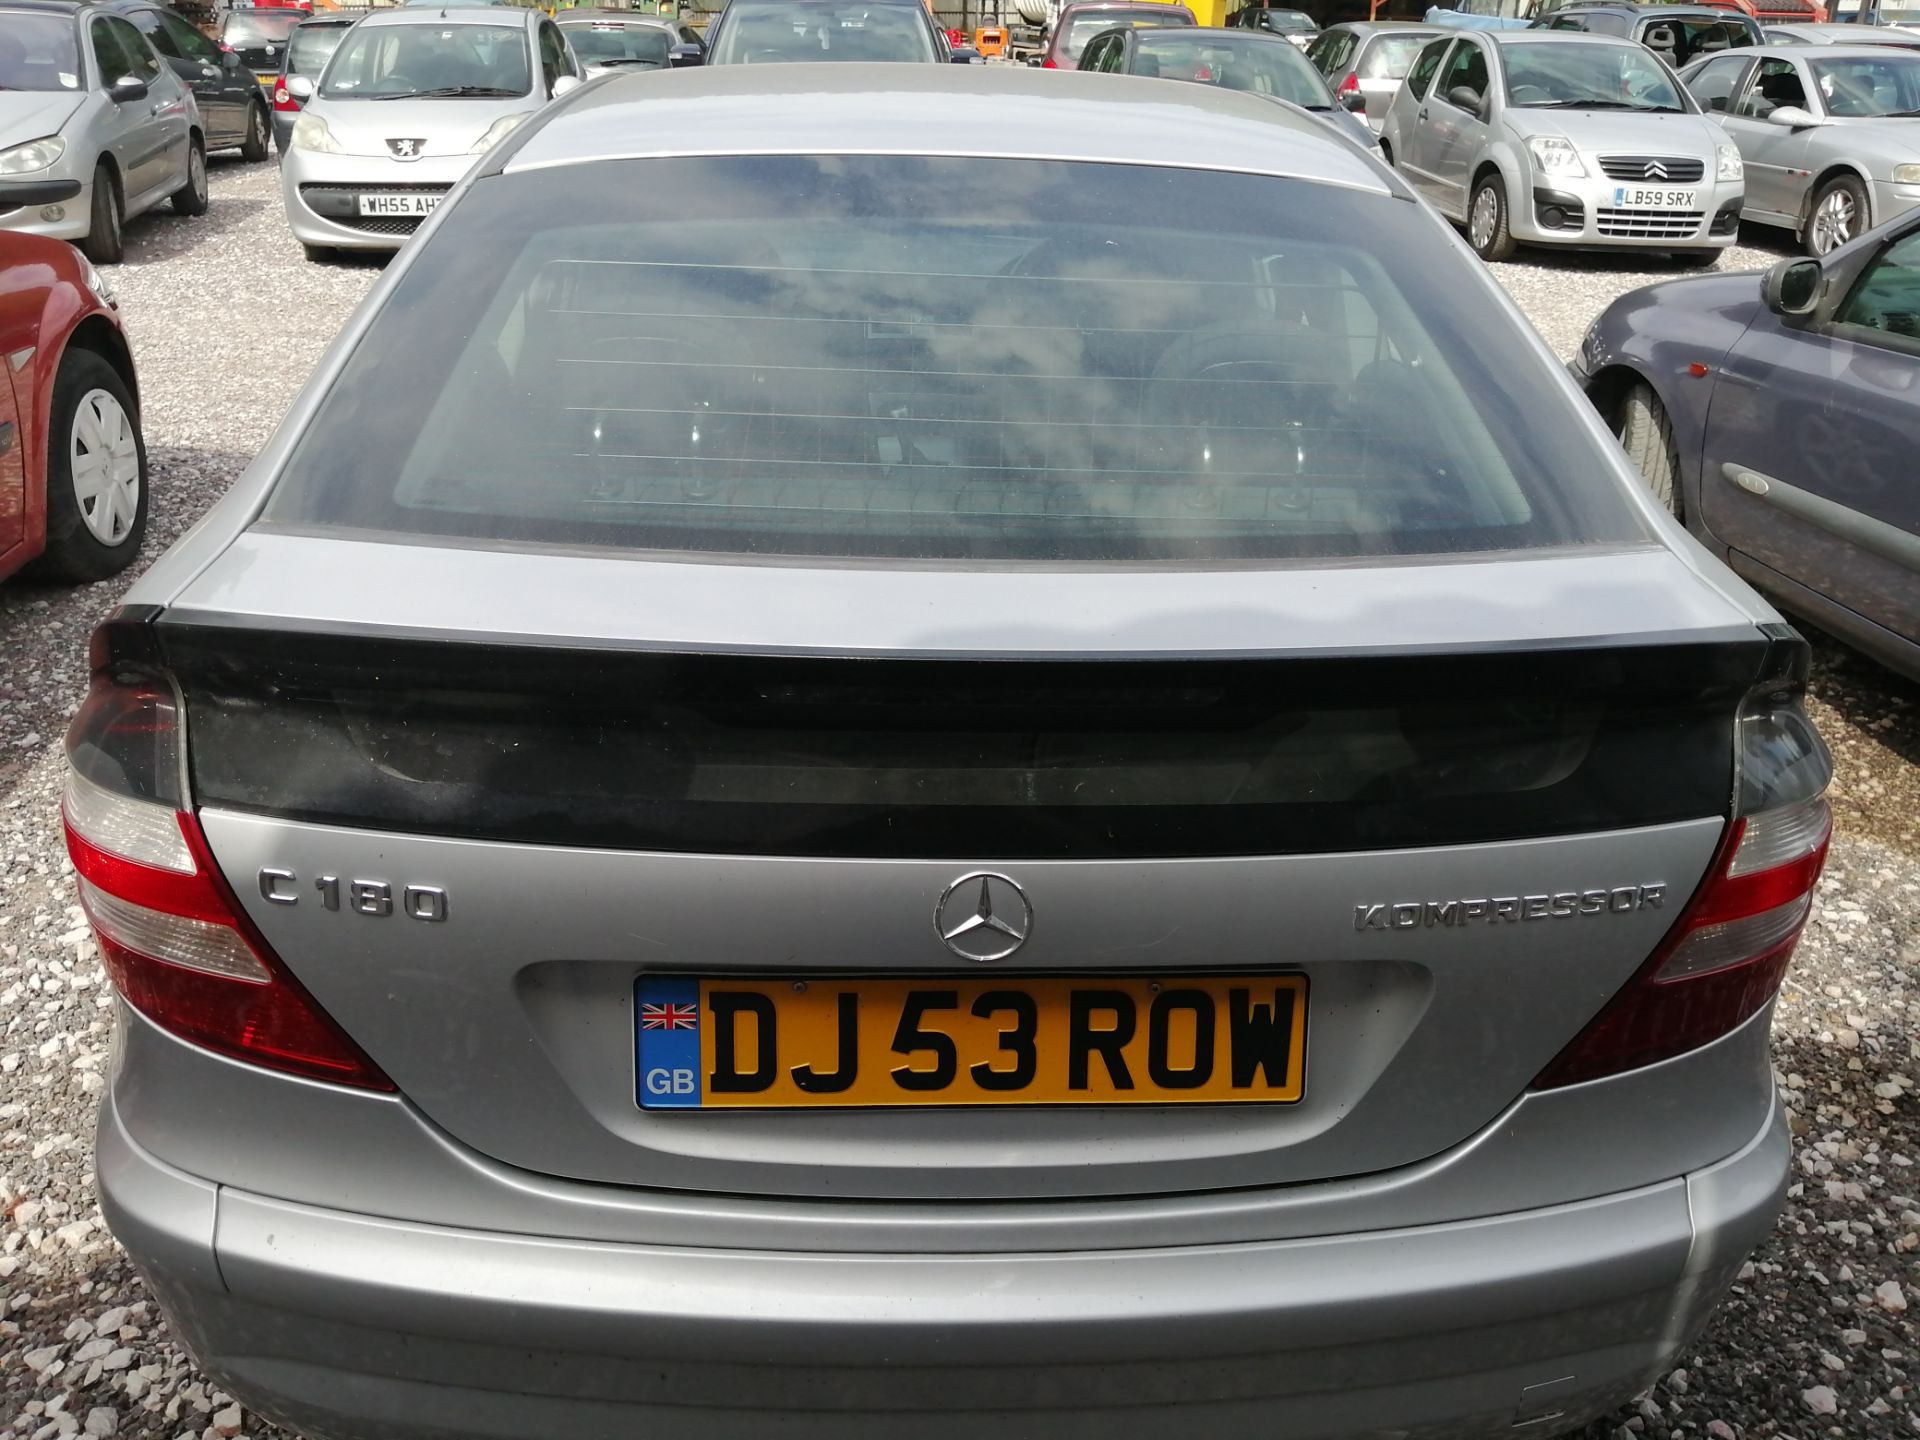 05/53 MERCEDES C180 K SPORT EDITION - 1796cc 3dr Coupe (Silver, 126k) - Image 4 of 7